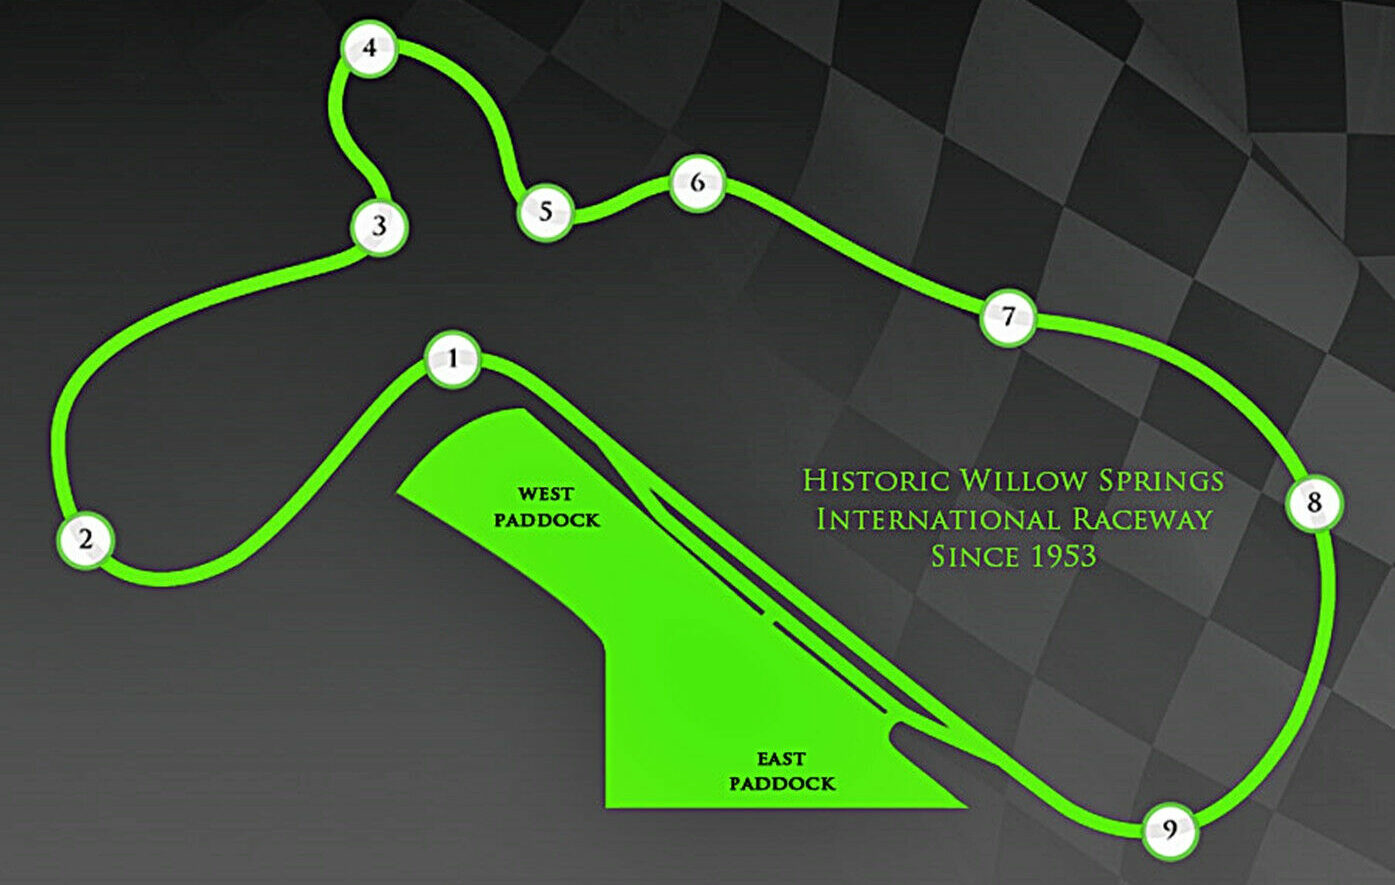 Willow Springs Map: Willow Springs International Raceway officials plan to repave the first half of the iconic 2.5-mile mail track in August, with the rest of the track repaving scheduled for next year. Image courtesy Willow Springs.